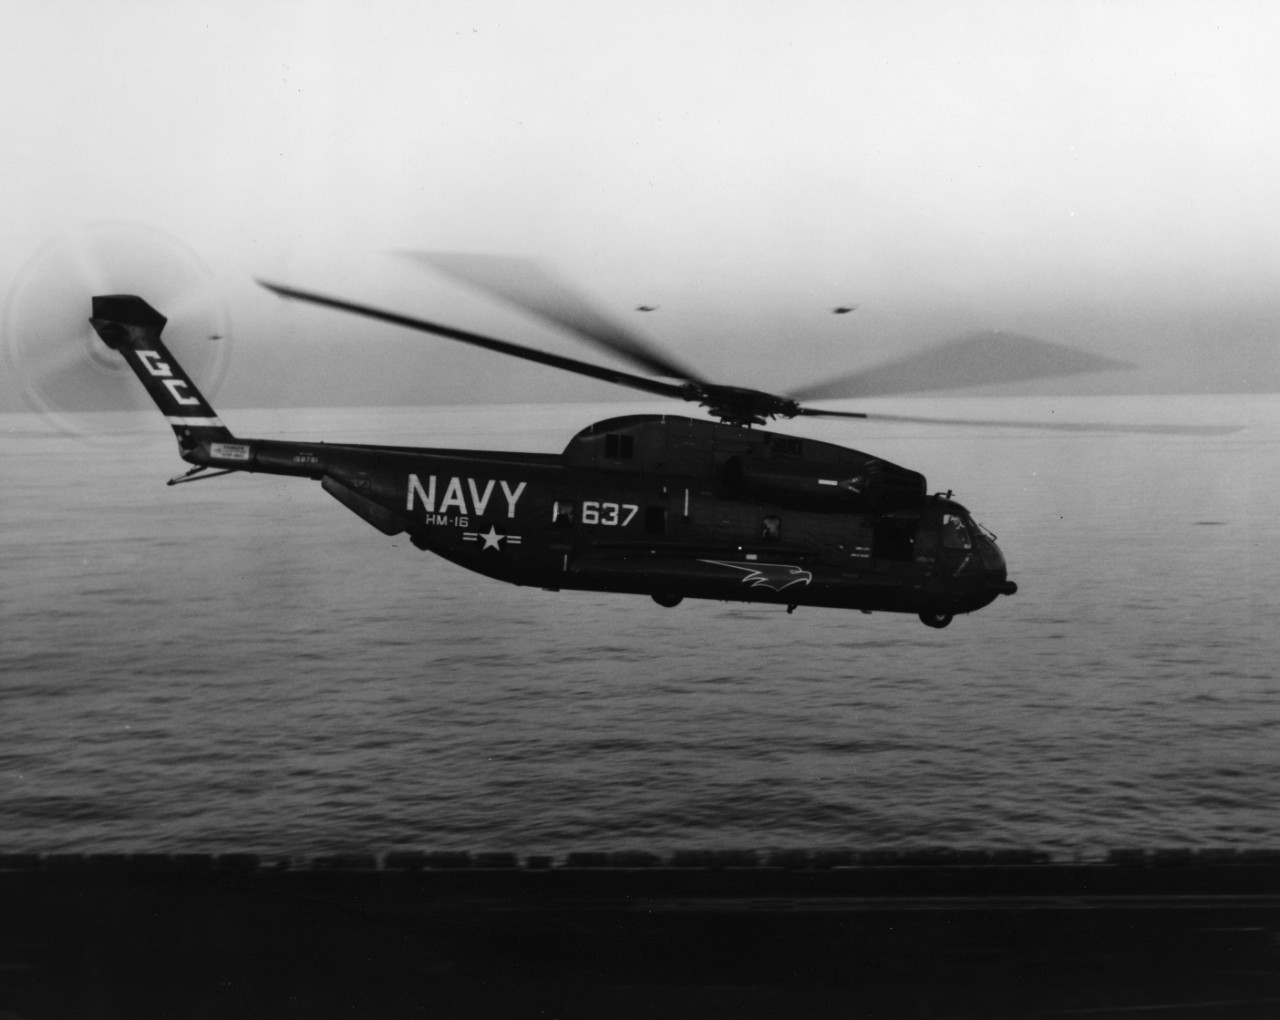 Right side view of an RH-53D Sea Stallion helicopter in flight just above the flight deck of USS Nimitz (CVN-68) in the Indian Ocean.